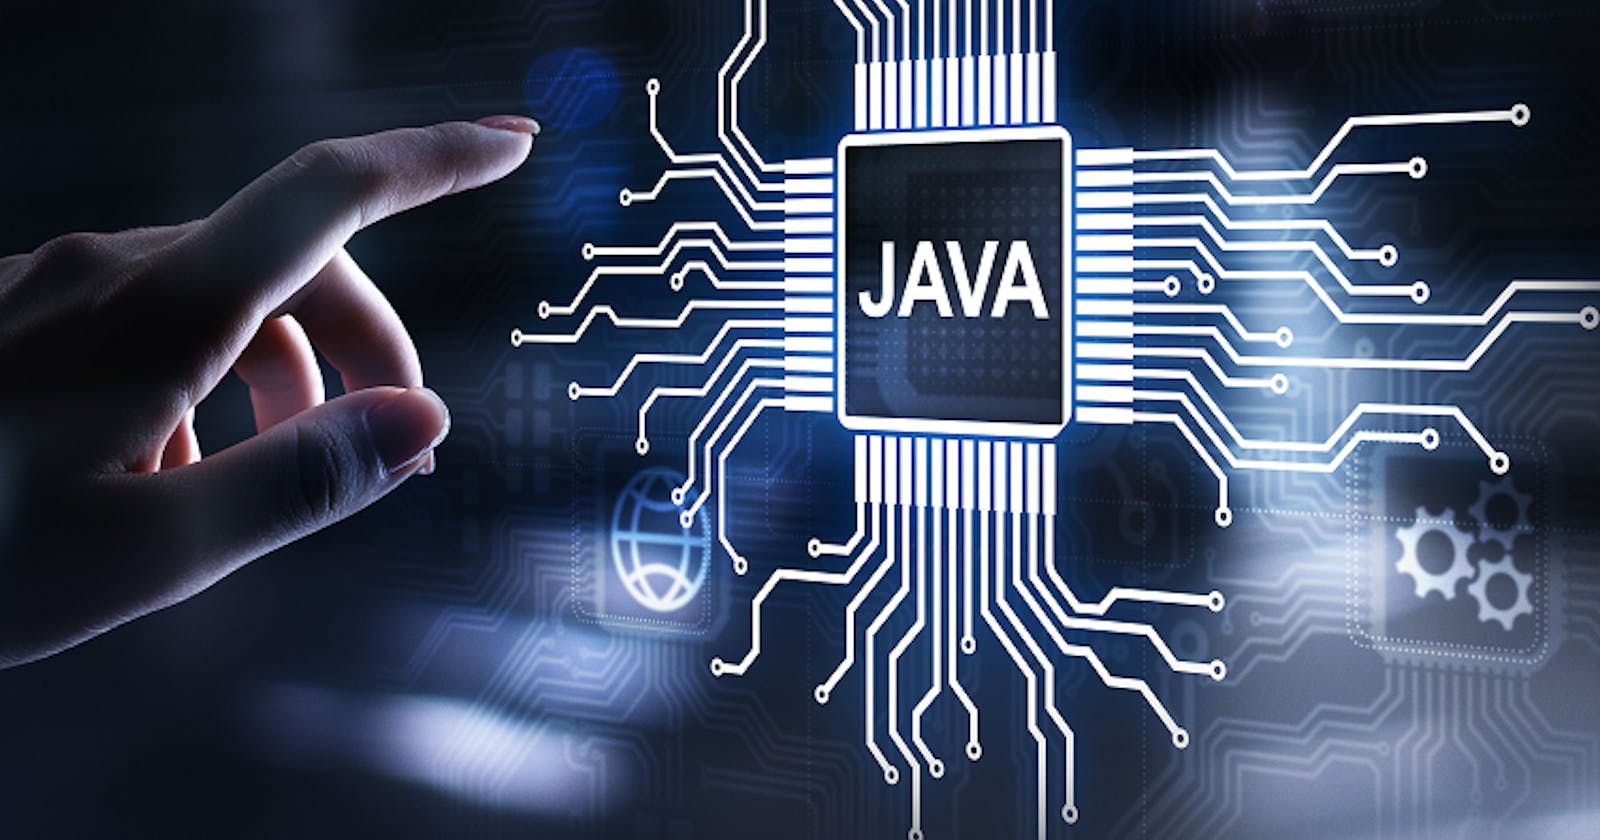 Are You Ready to Start Java Programming Today?